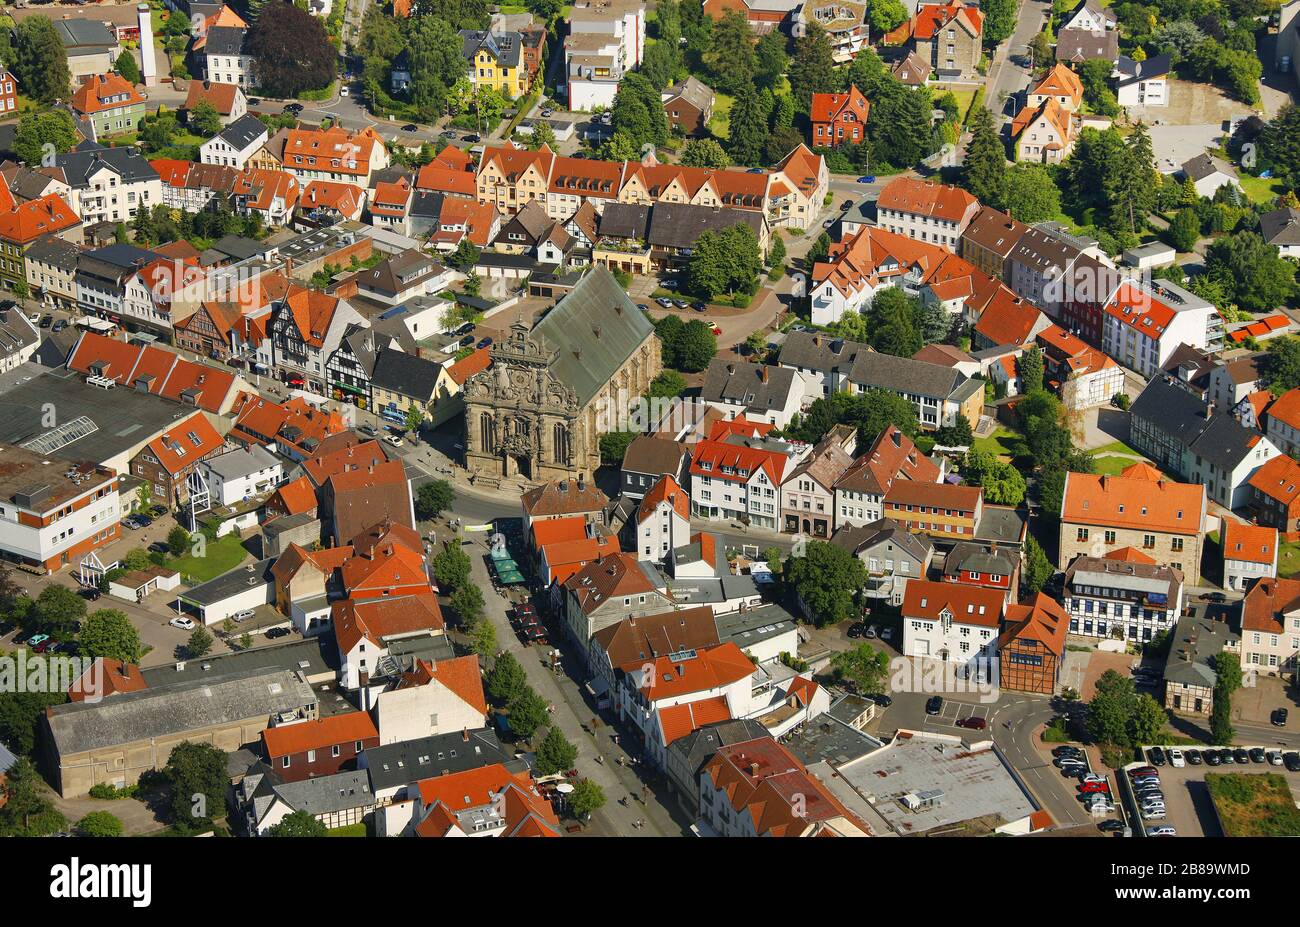 , city centre of Bueckeburg with town church, 27.06.2011, aerial view, Germany, Lower Saxony, Bueckeburg Stock Photo